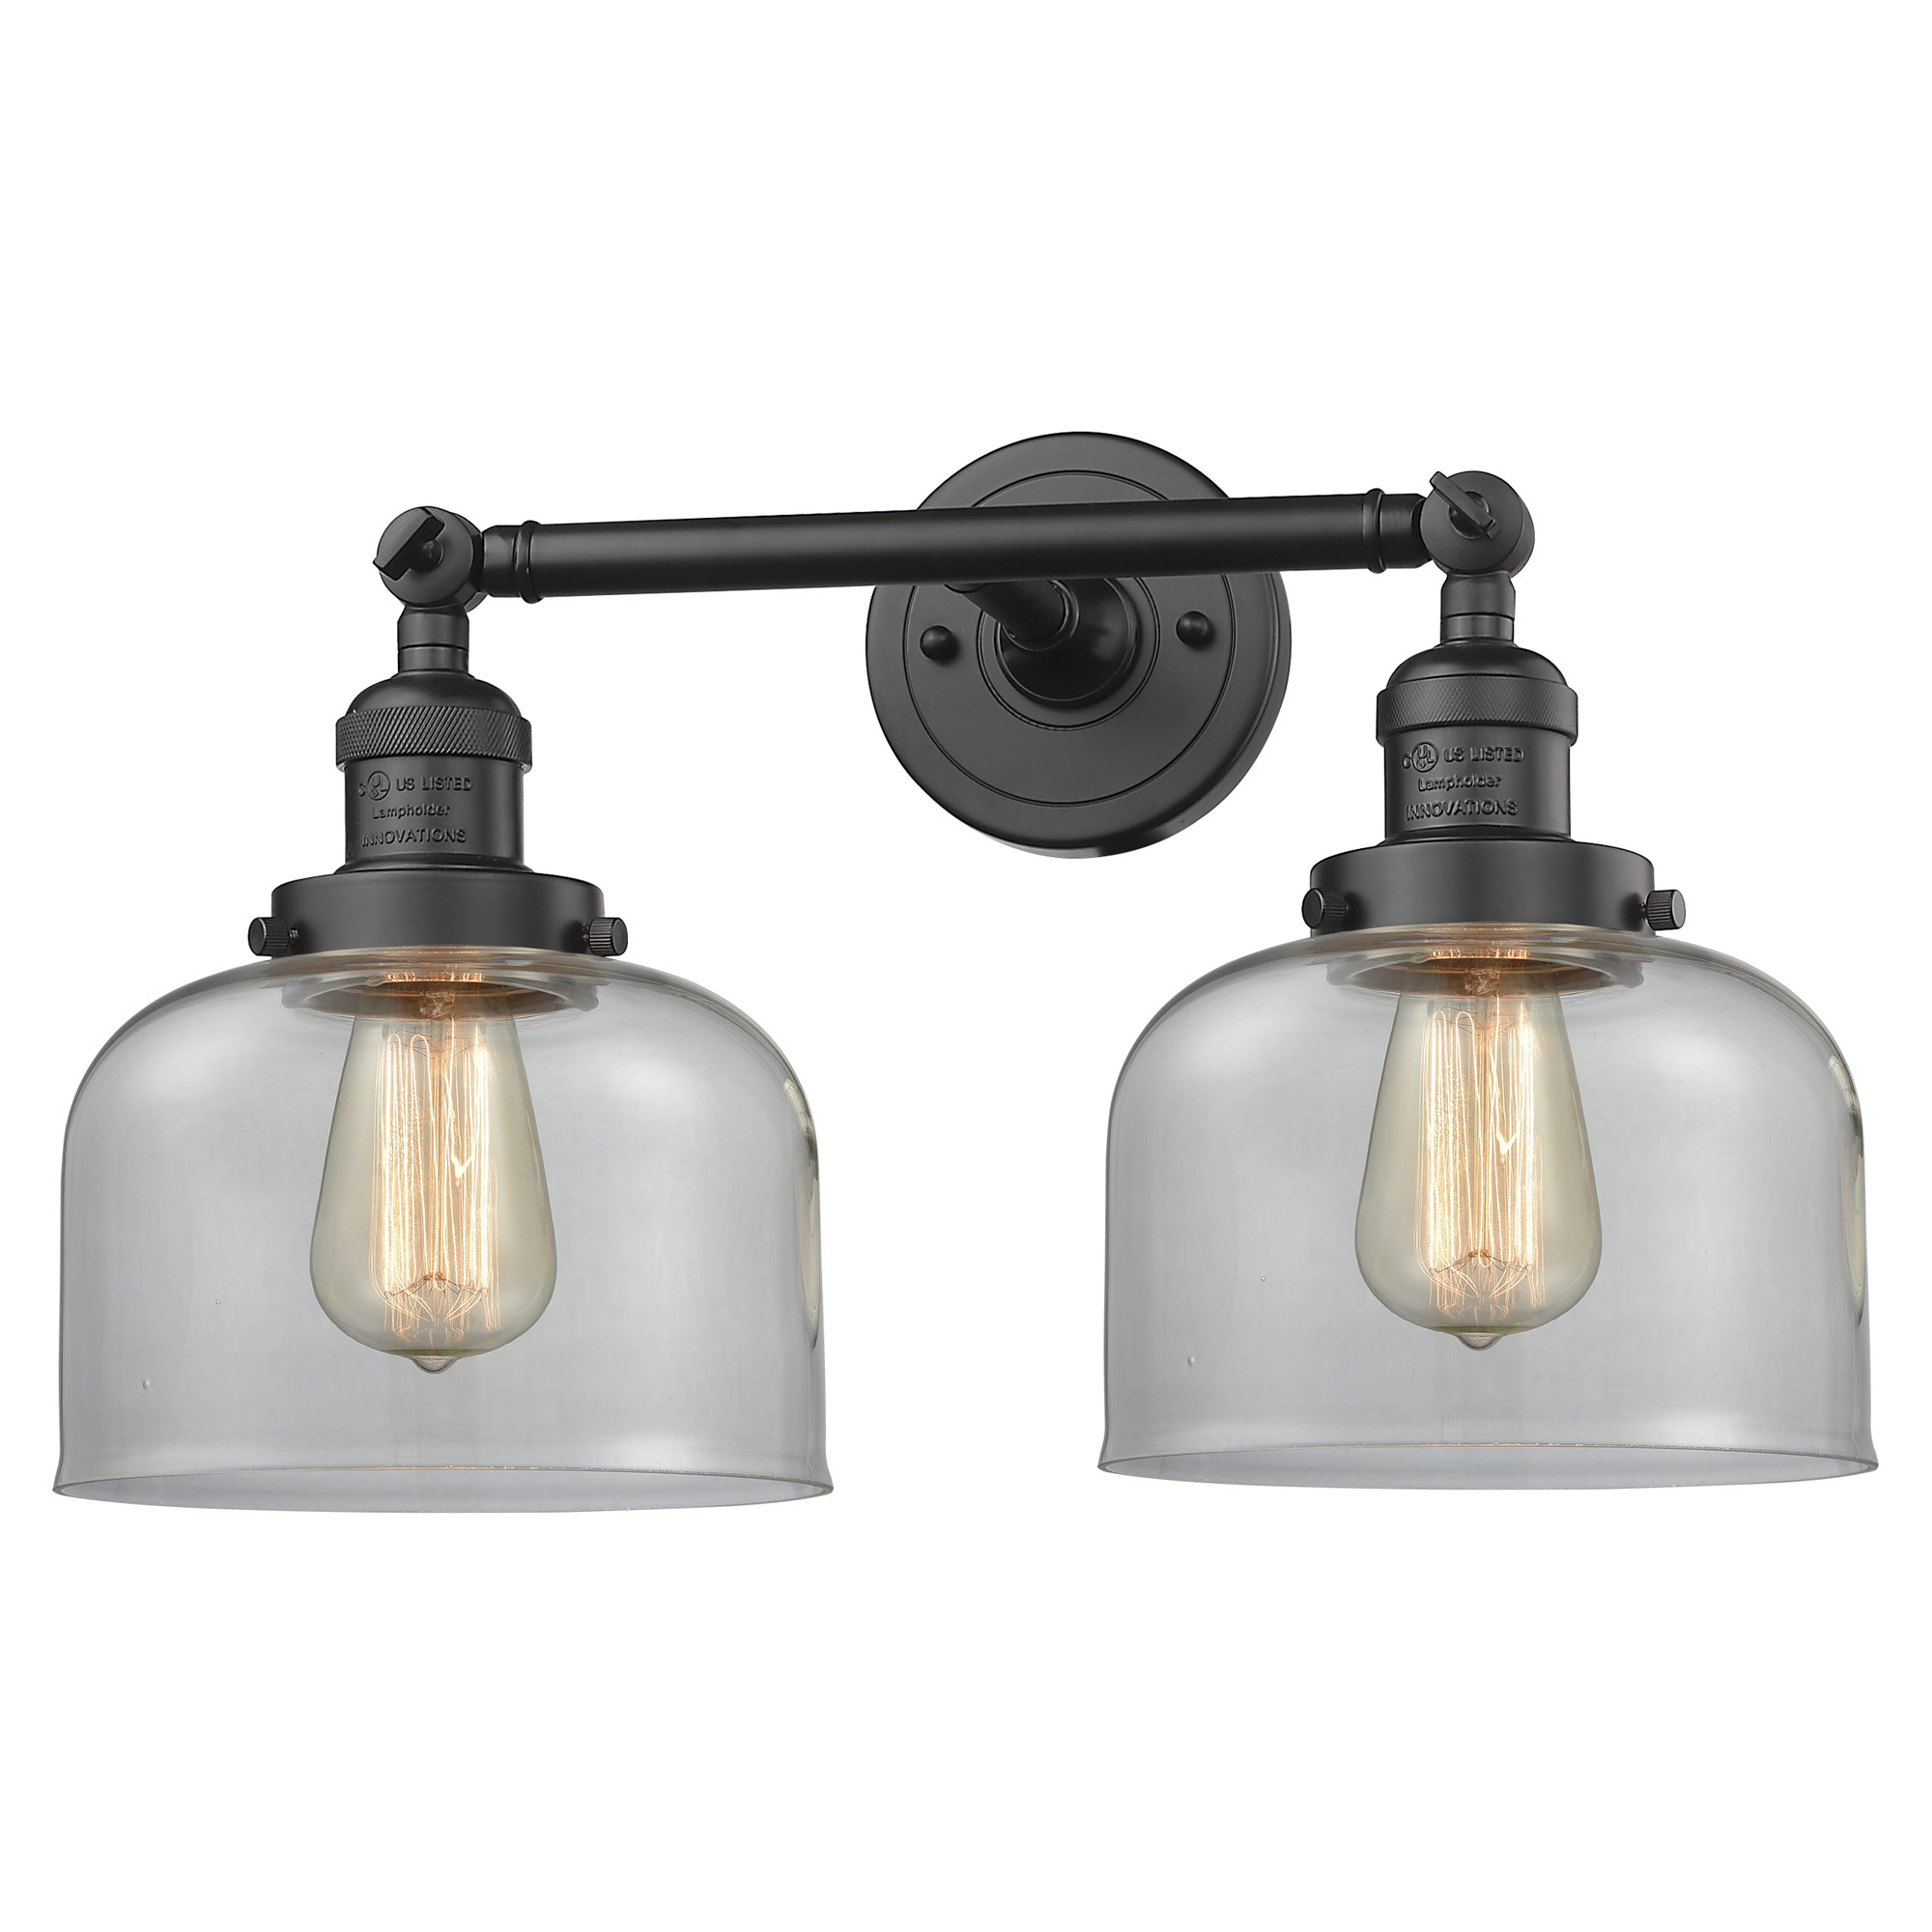 Large Bell Bathroom Vanity Light By, Clear Glass Bell Vanity Light Shade